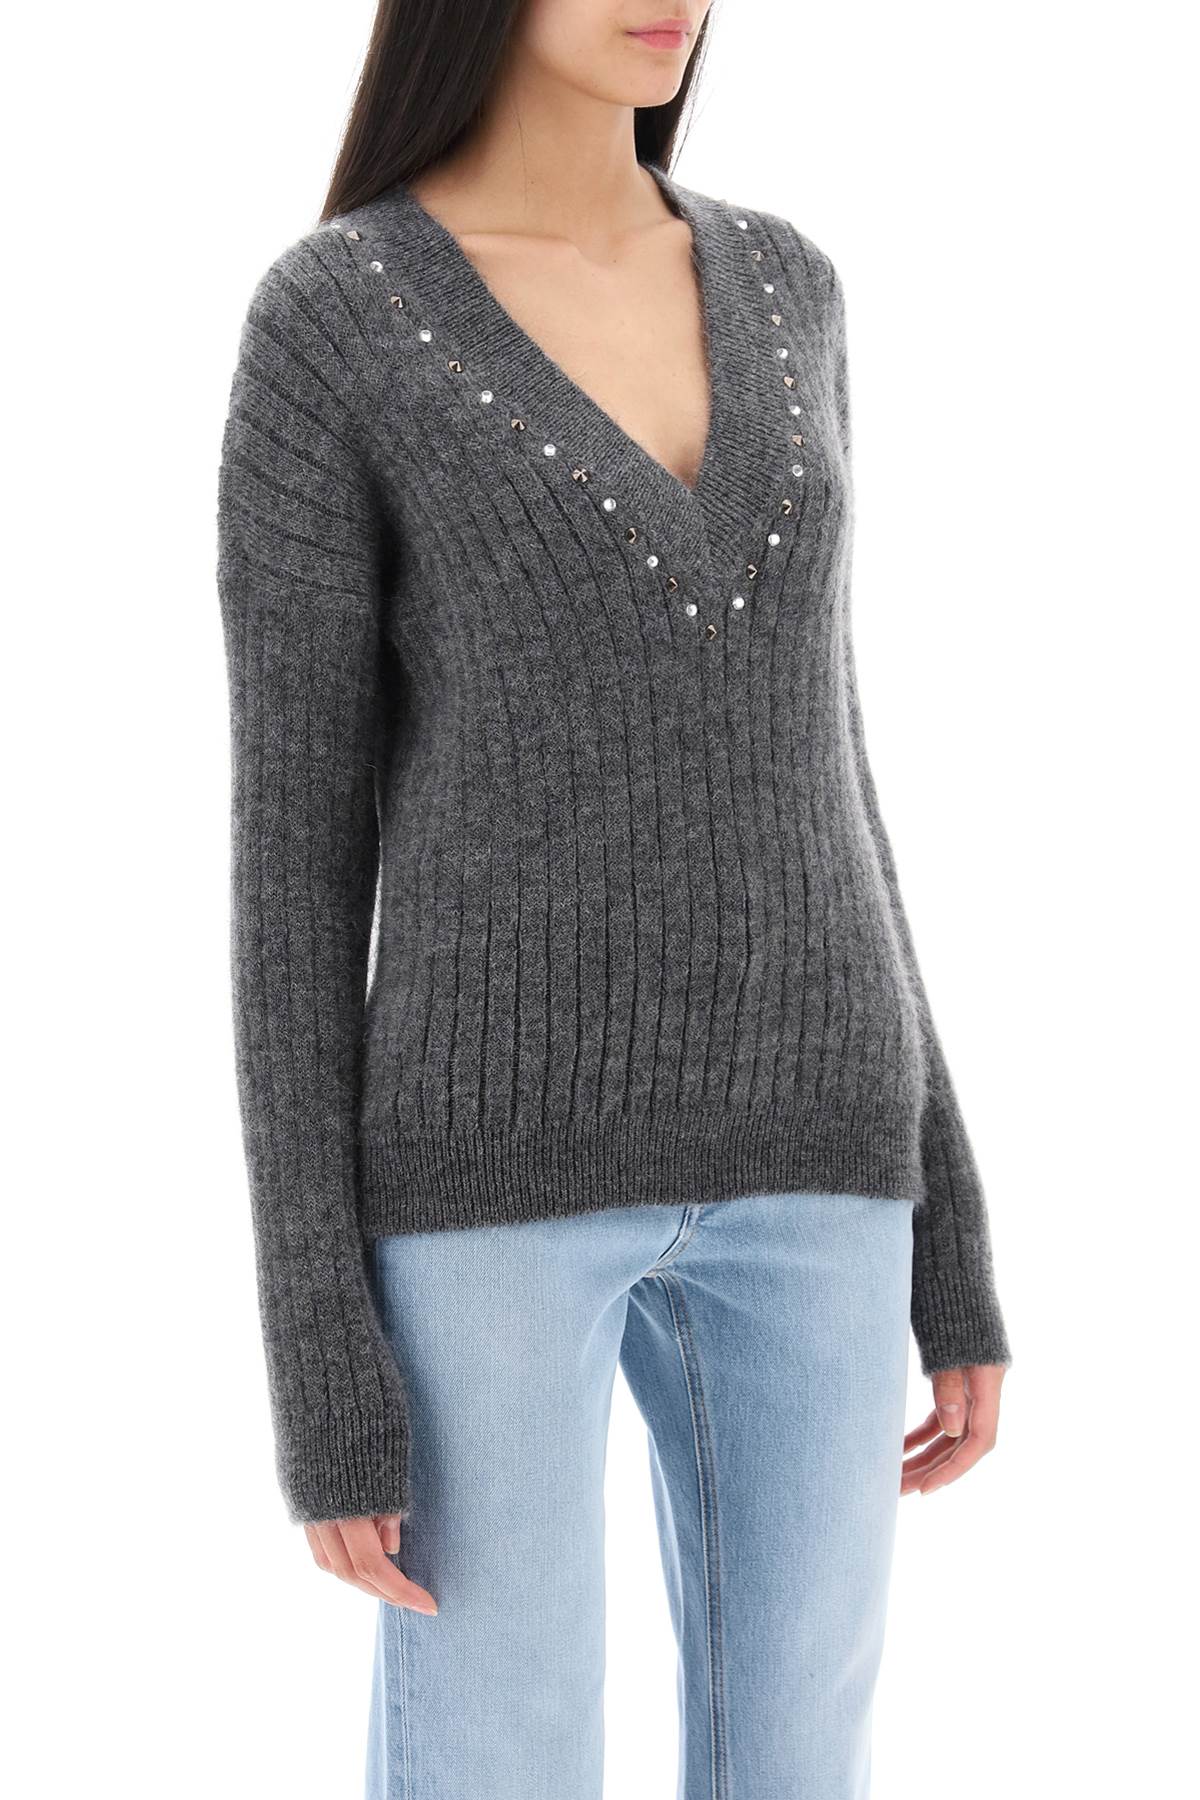 Shop Alessandra Rich Wool Knit Sweater With Studs And Crystals In Grey Melange (grey)